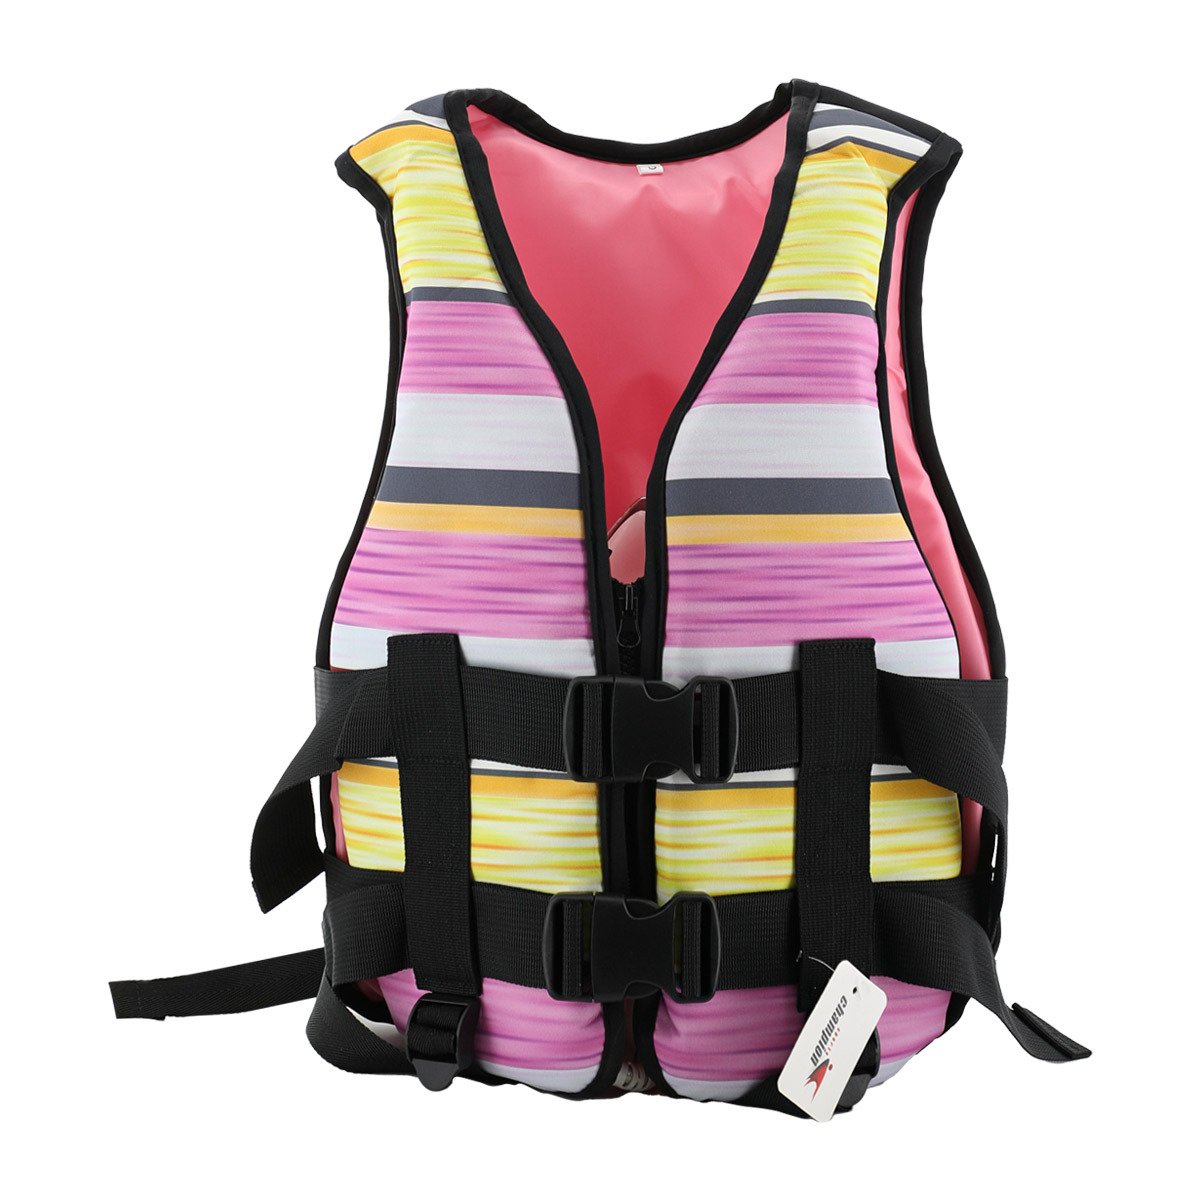 Sports Champion Teen Life Jacket LV807-S Small Assorted Color / Design